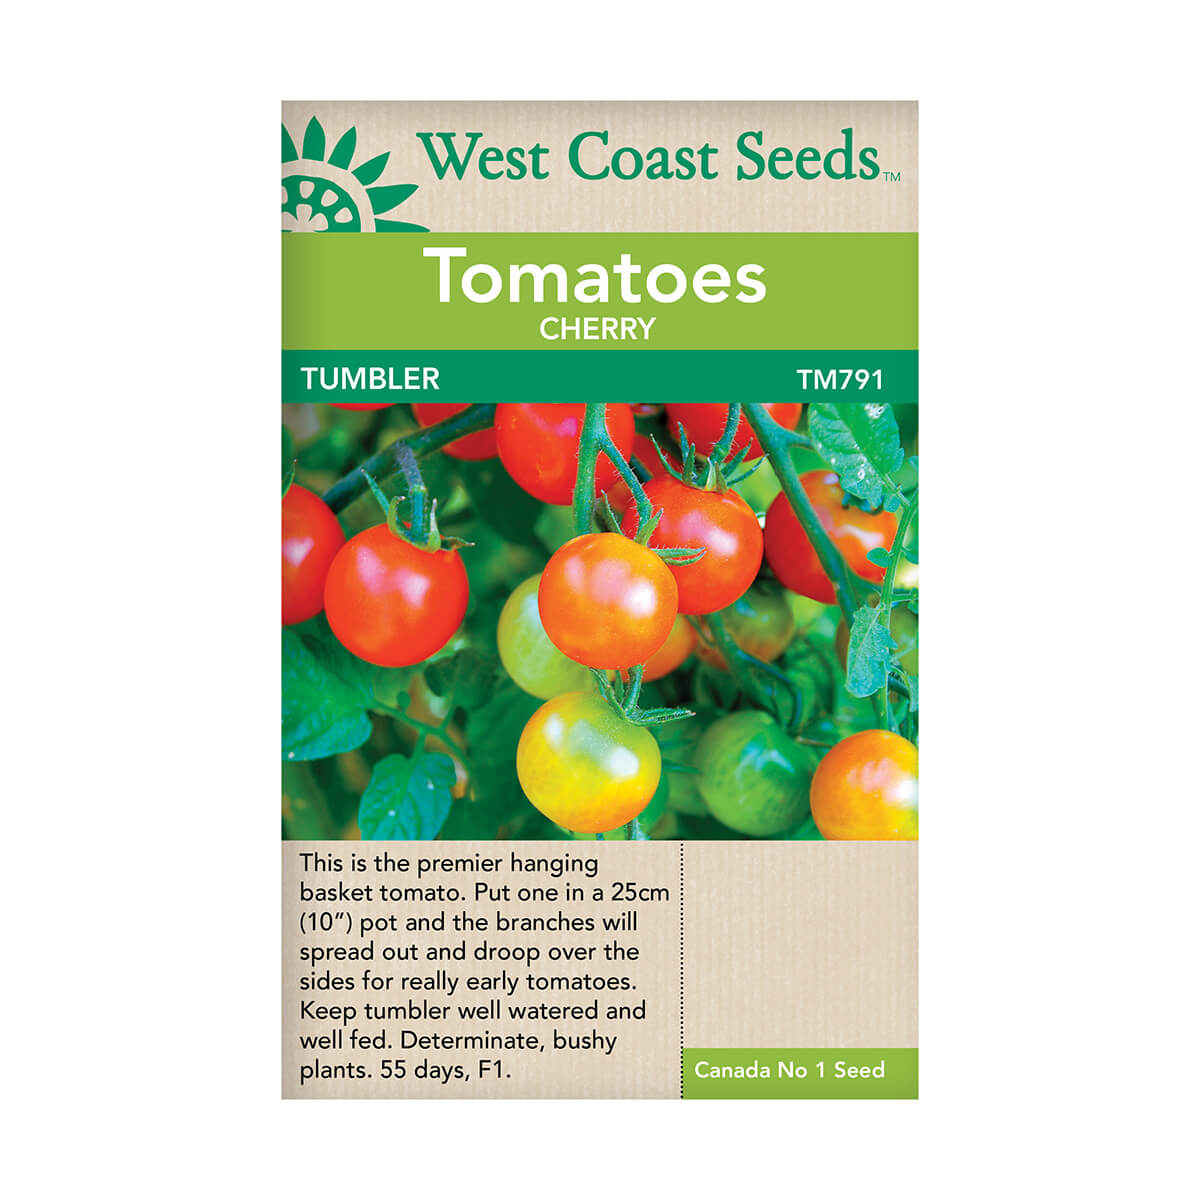 Tumbler Cherry Tomato Seeds - approx. 10 seeds